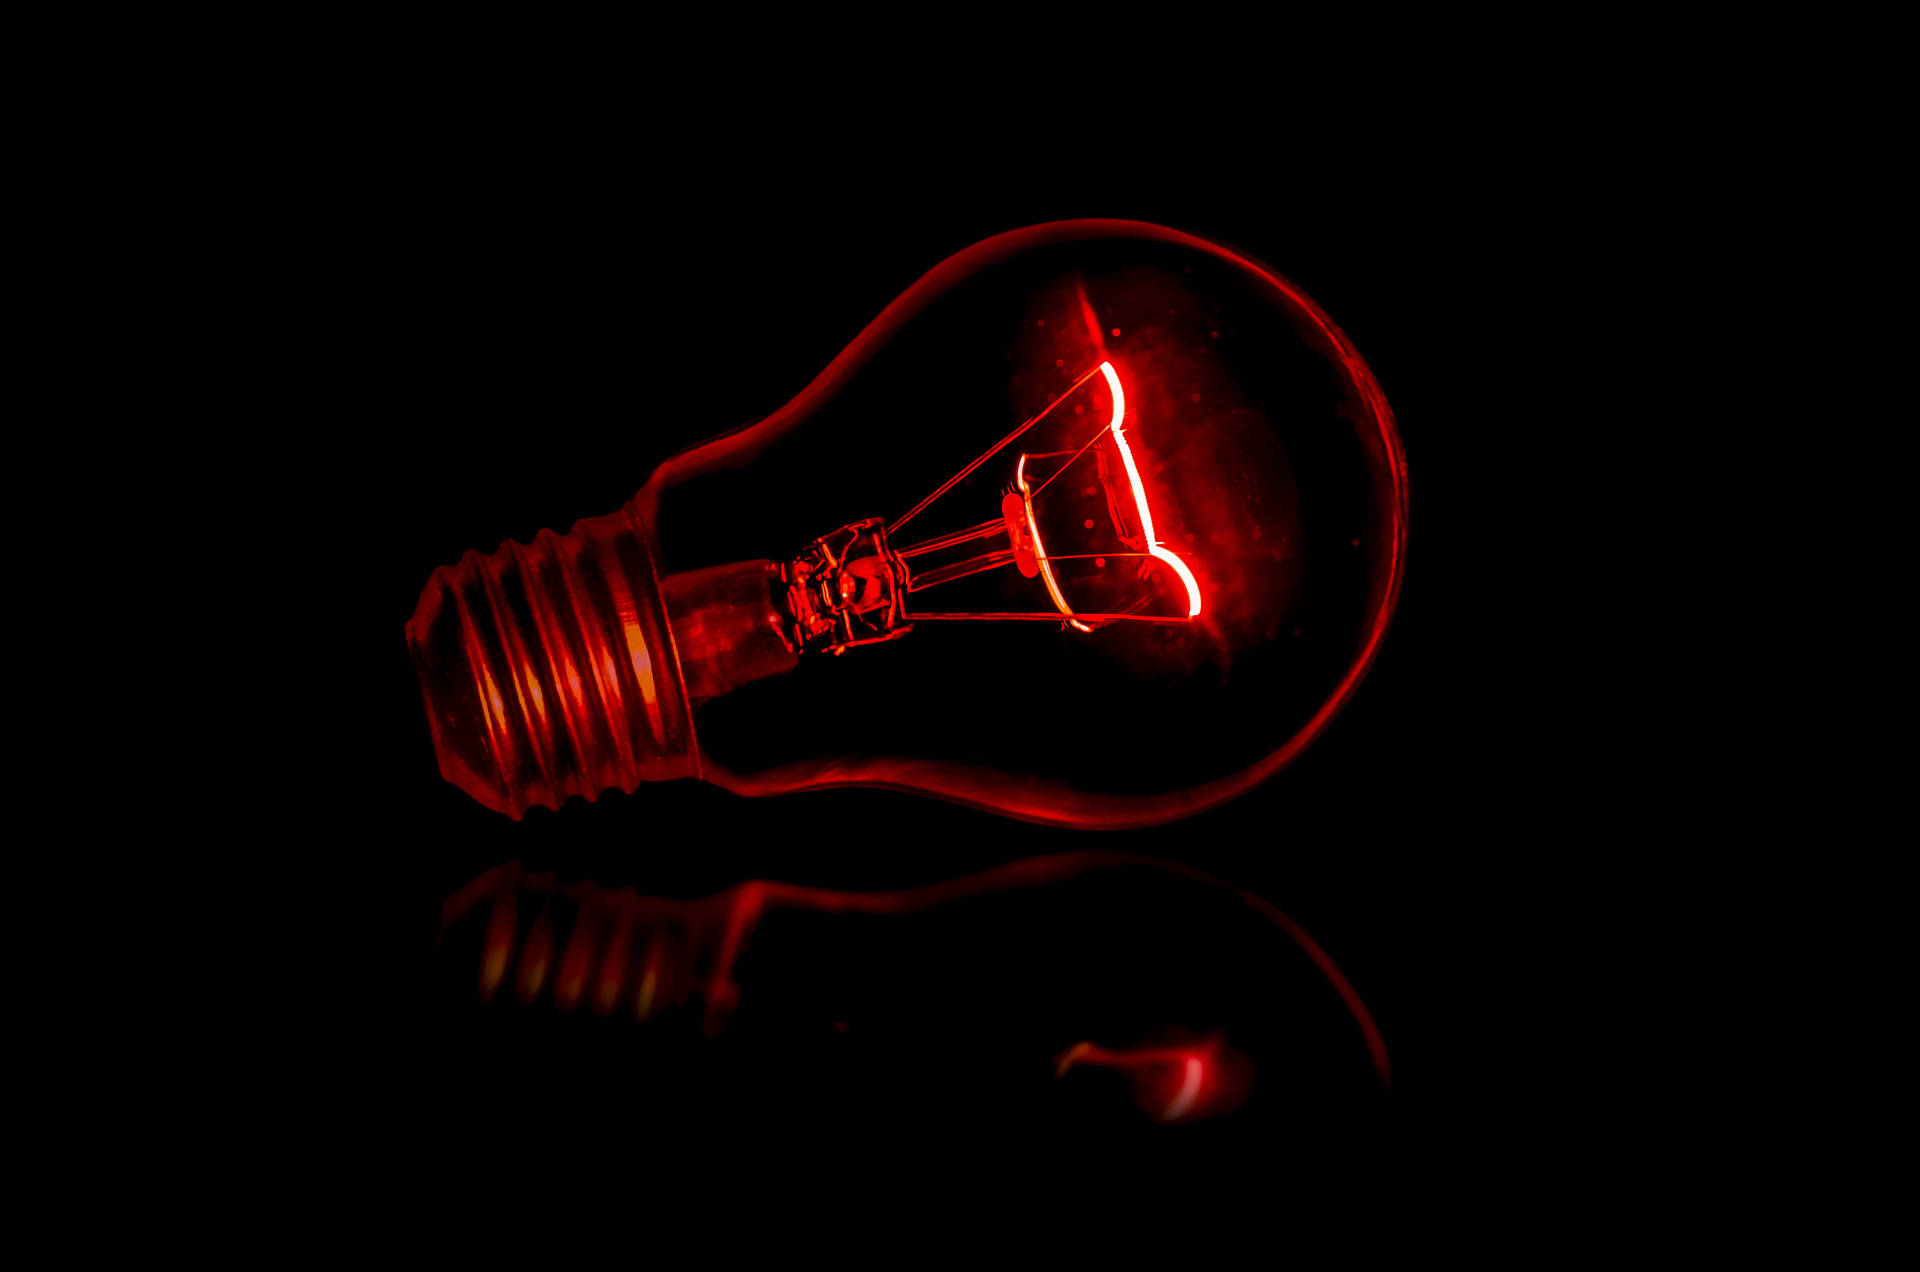 Free Electricity Wallpaper Downloads, [200+] Electricity Wallpapers for  FREE 